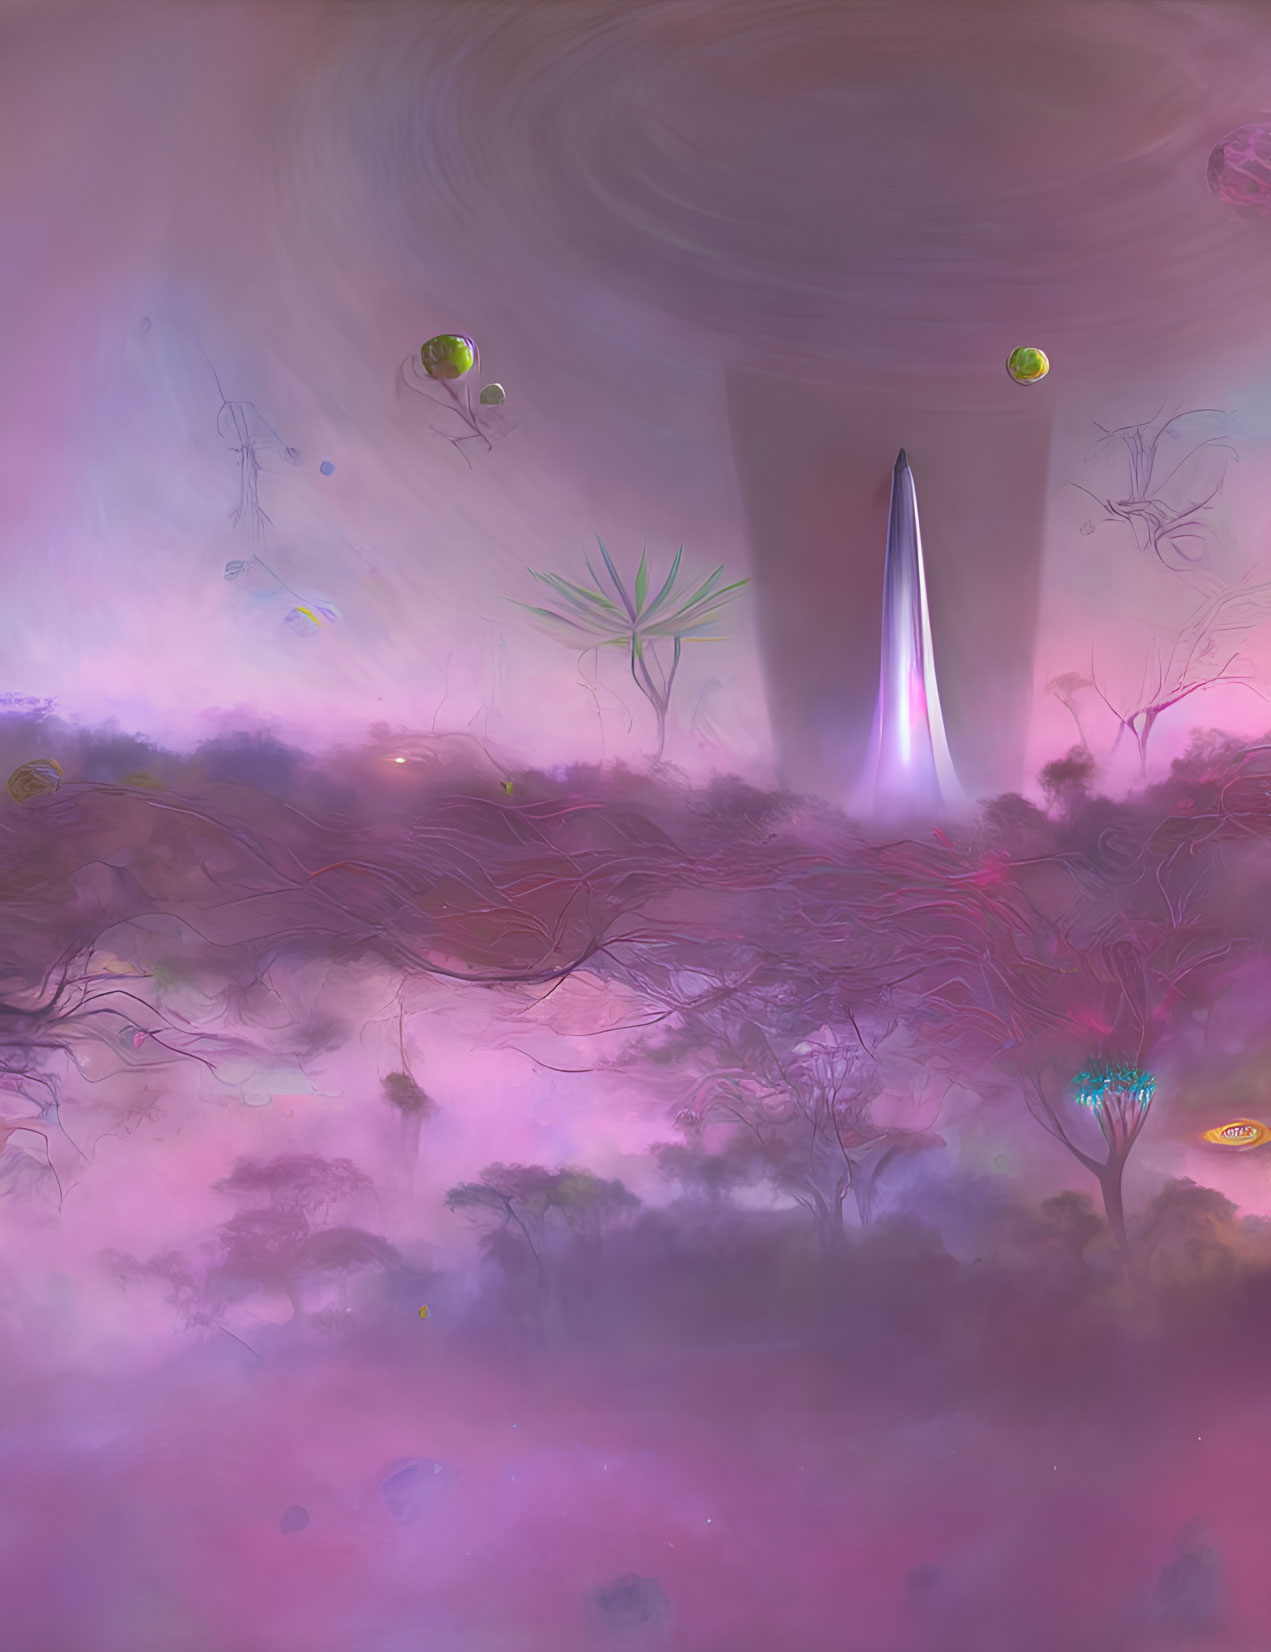 Surreal landscape with pink and purple hues and floating orbs